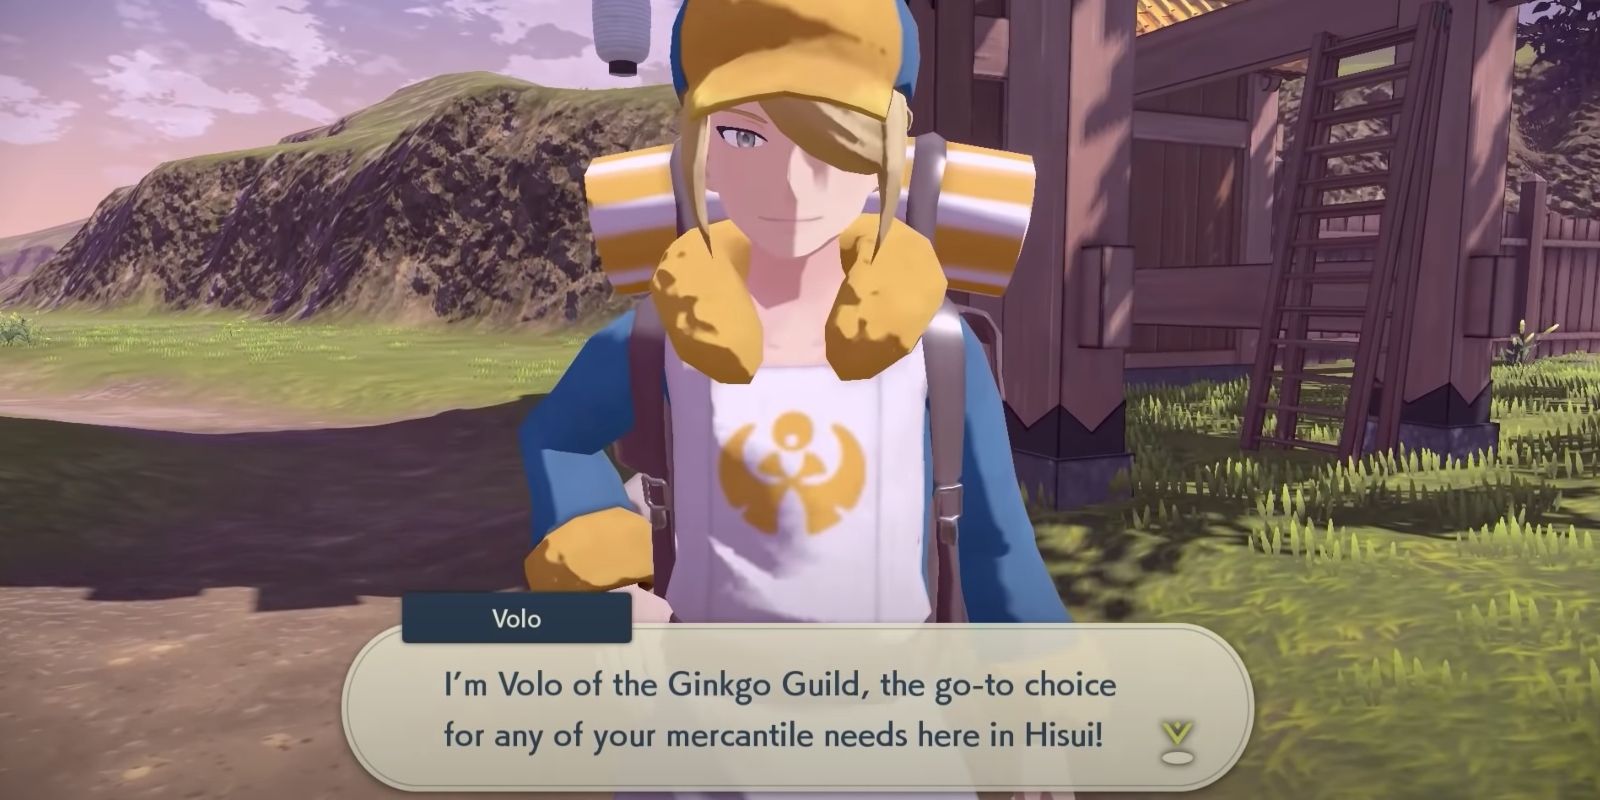 Volo, a merchant from the Ginkgo Guild in Pokemon Legends: Arceus, is likely Cynthia's ancestor.